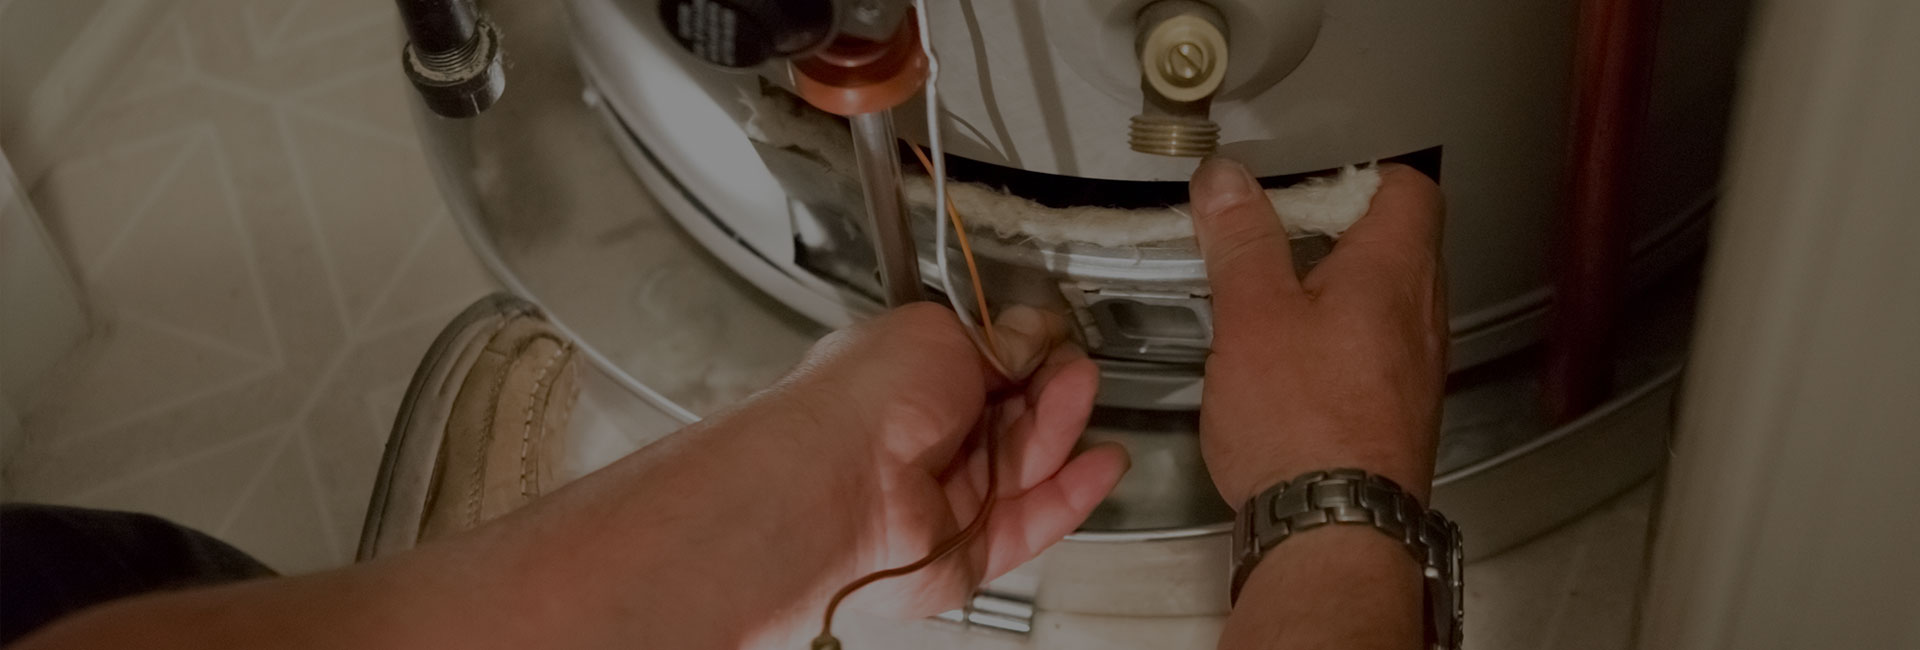 removing a part from a water heater